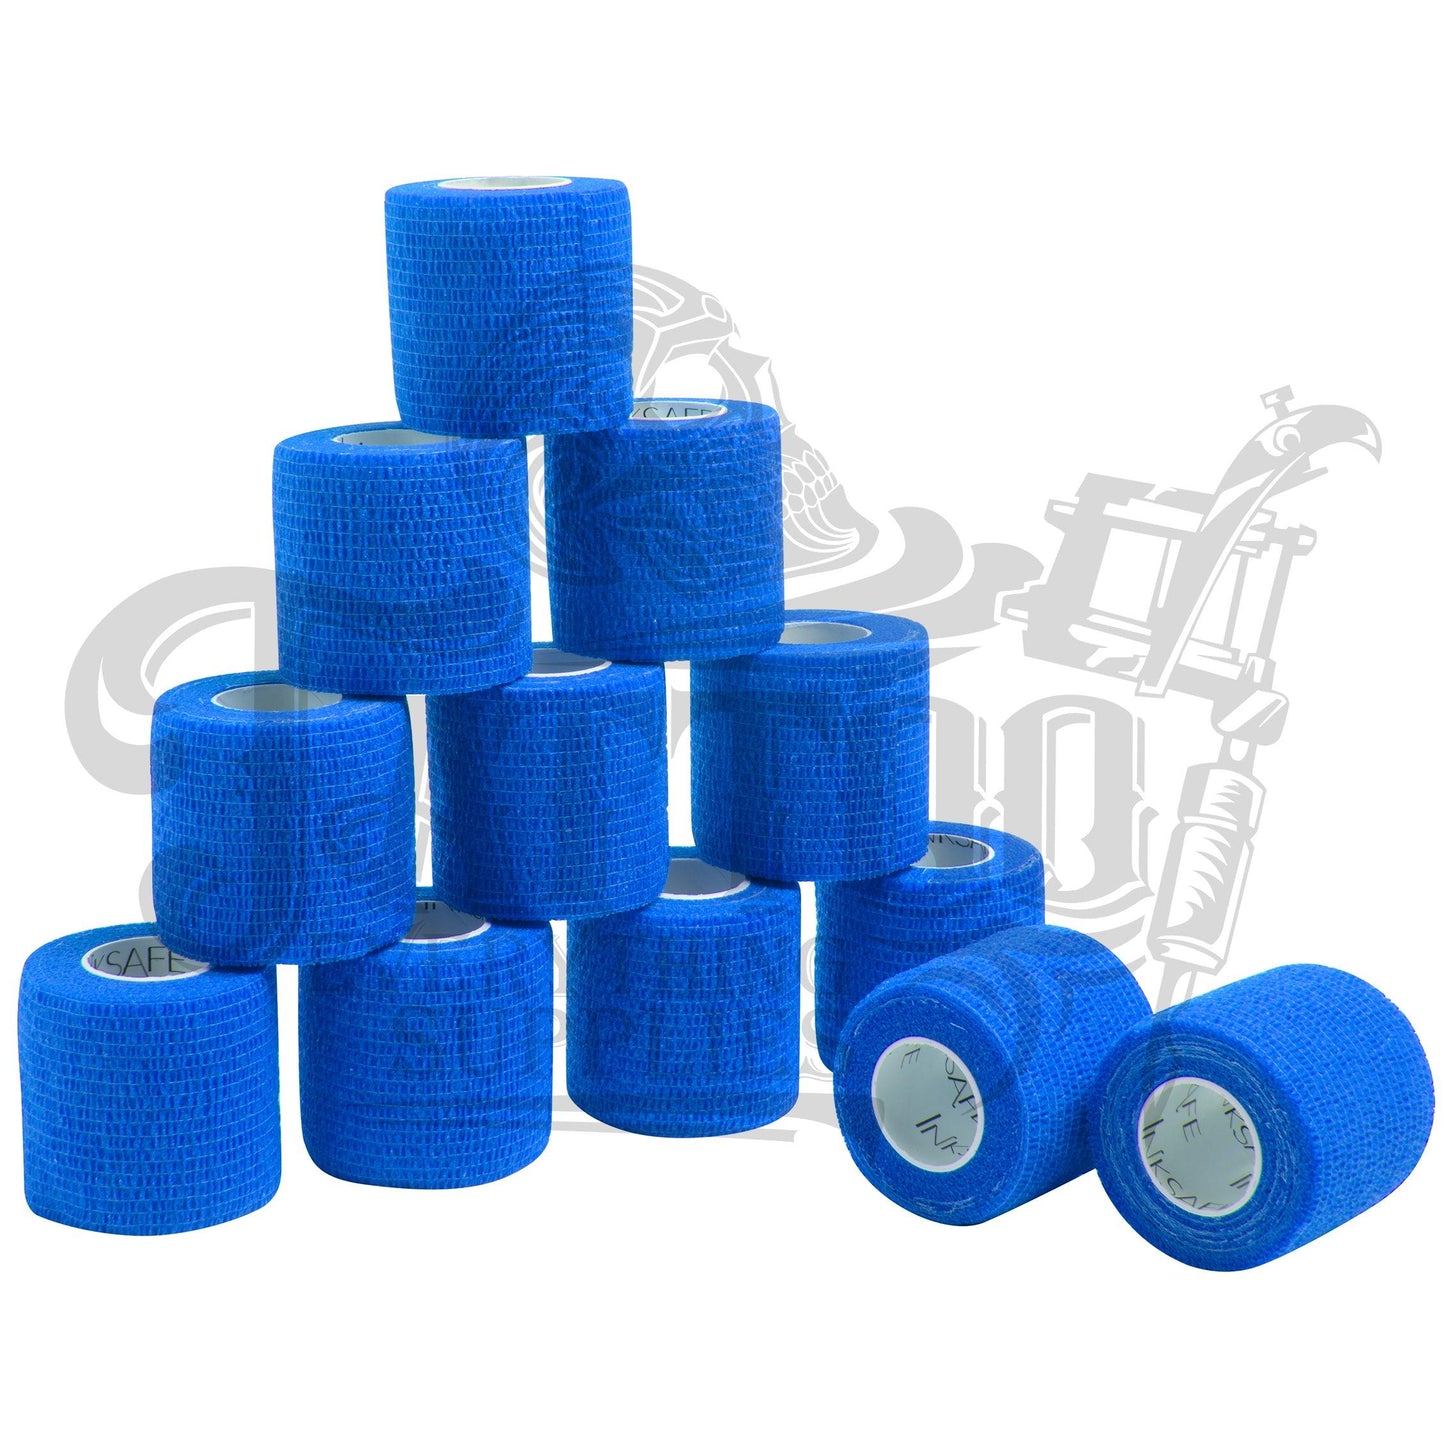 Cohesive Grip Tape 2" - Tattoo Everything Supplies